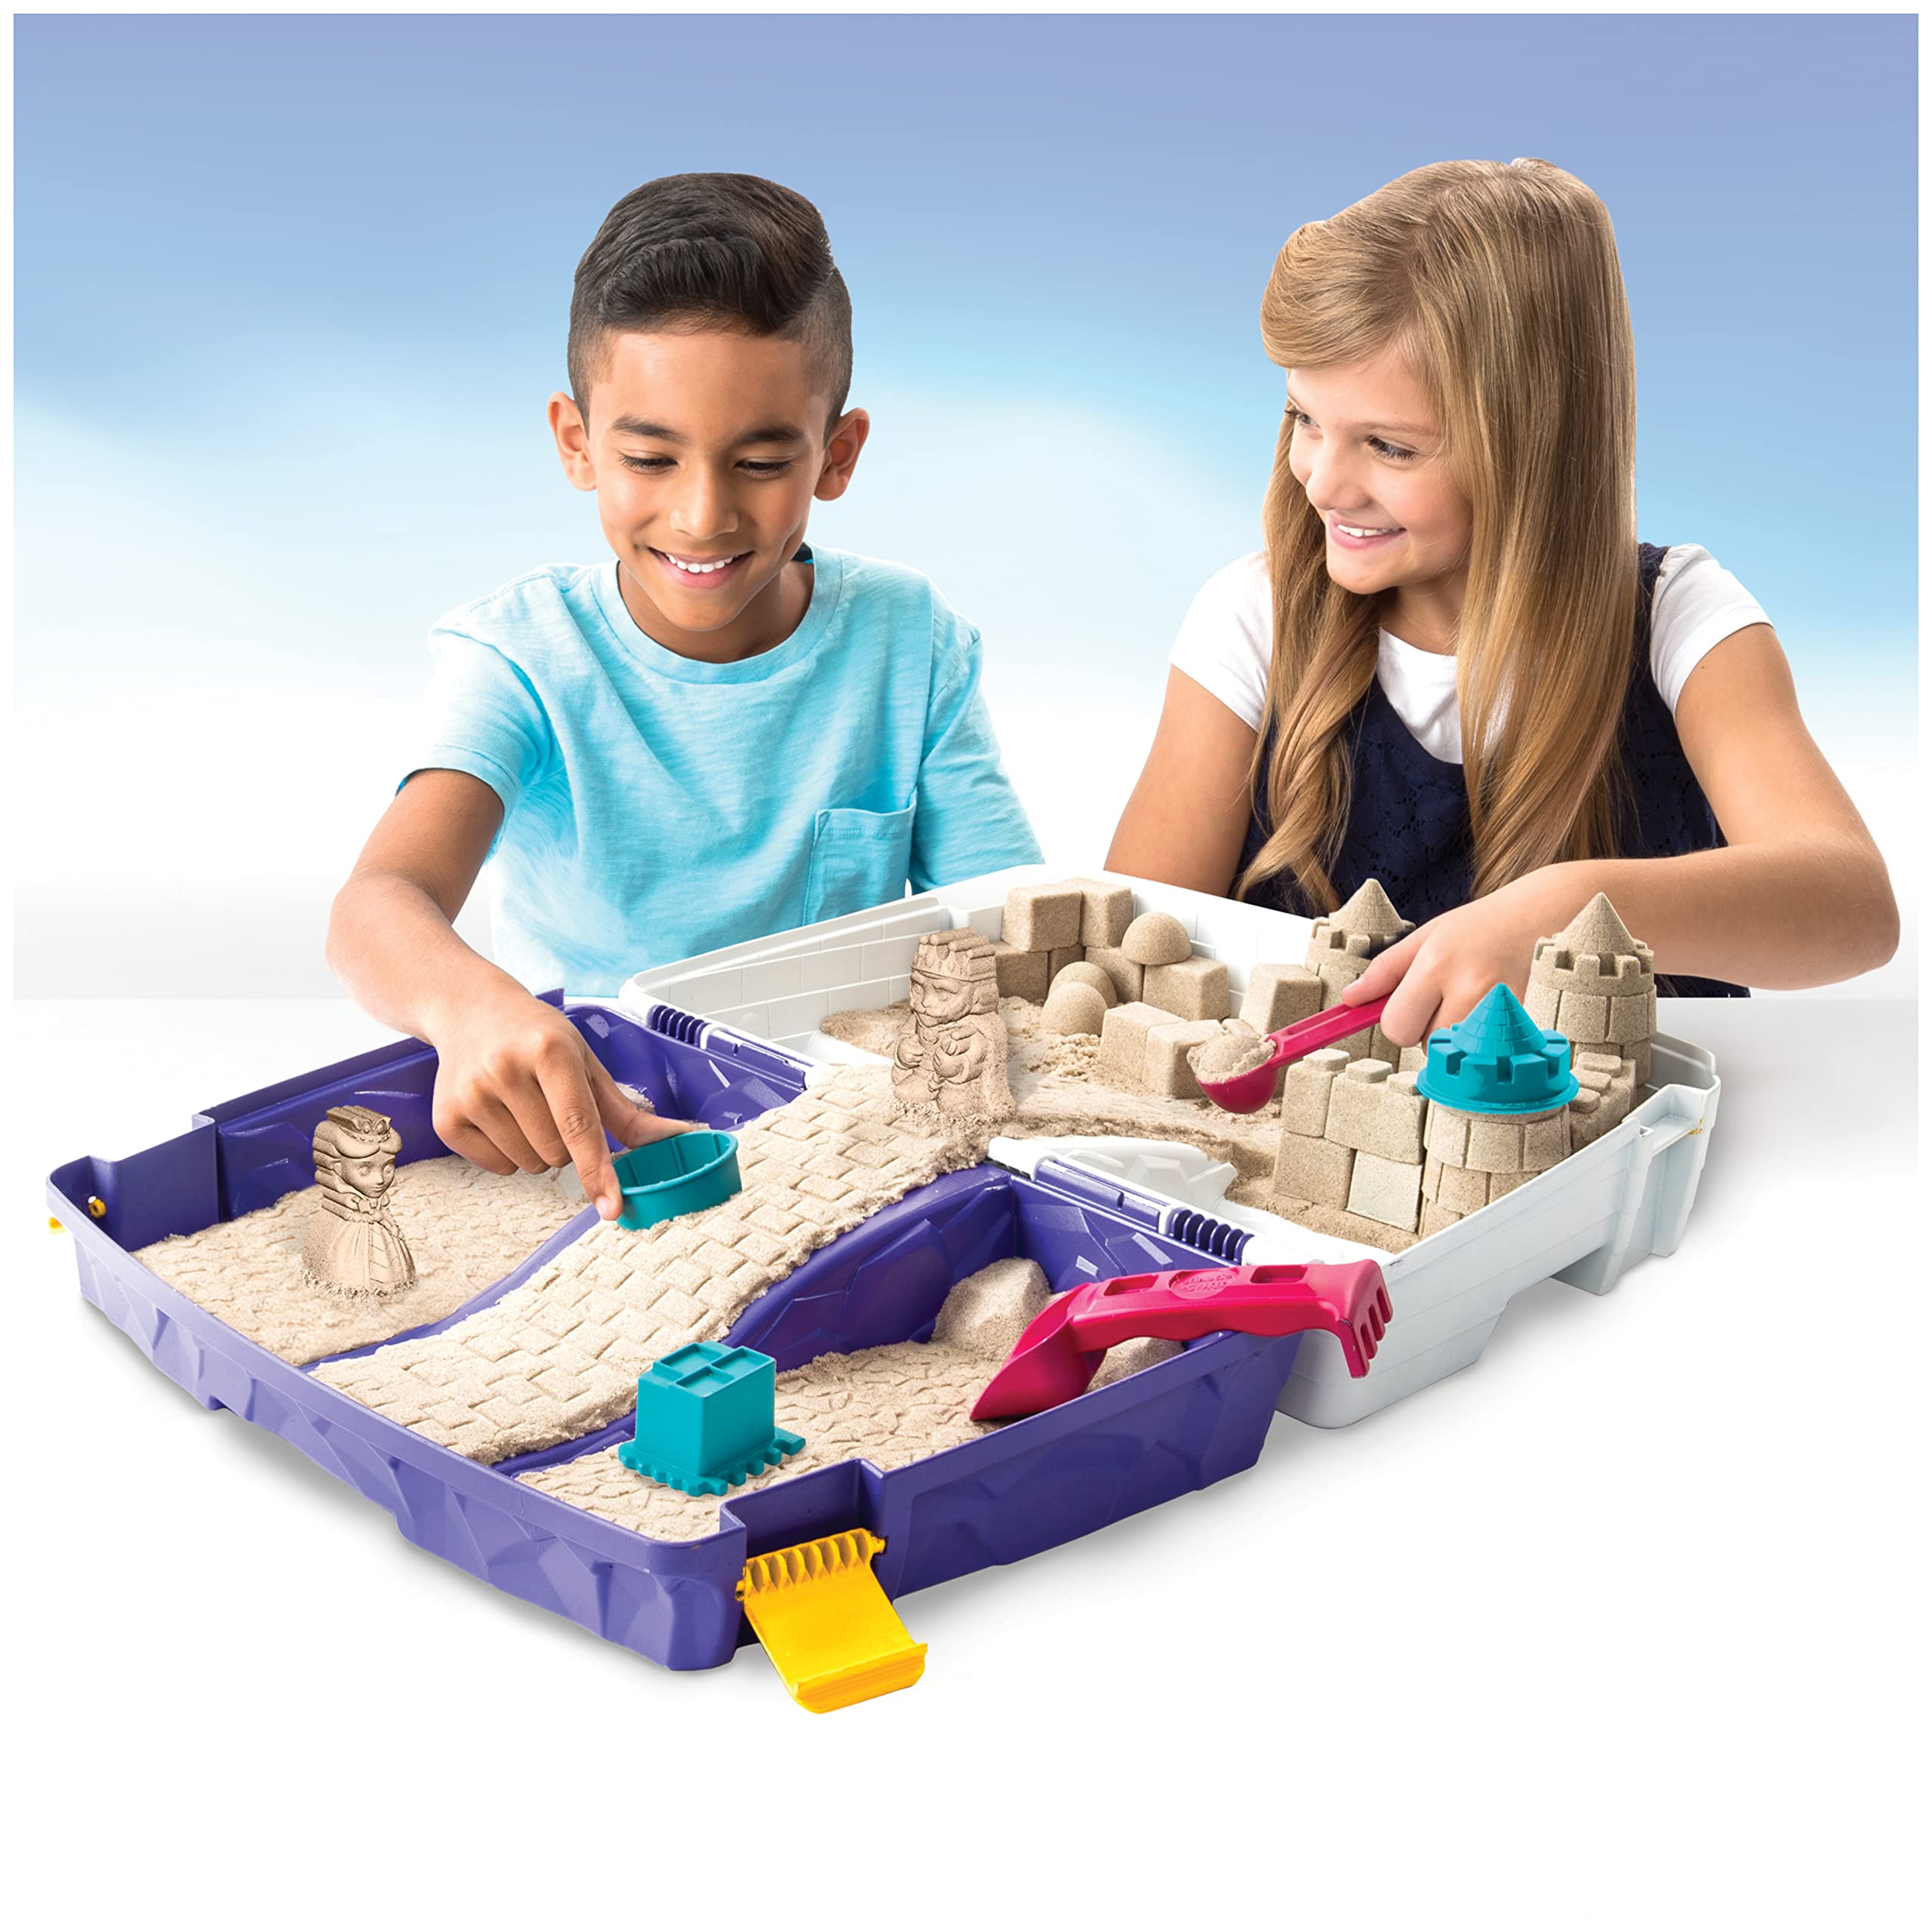 Kinetic Sand, Folding Sand Box with 2lbs of Kinetic Sand, Includes Molds and Tools, Play Sand Sensory Toys for Kids Ages 3 and up